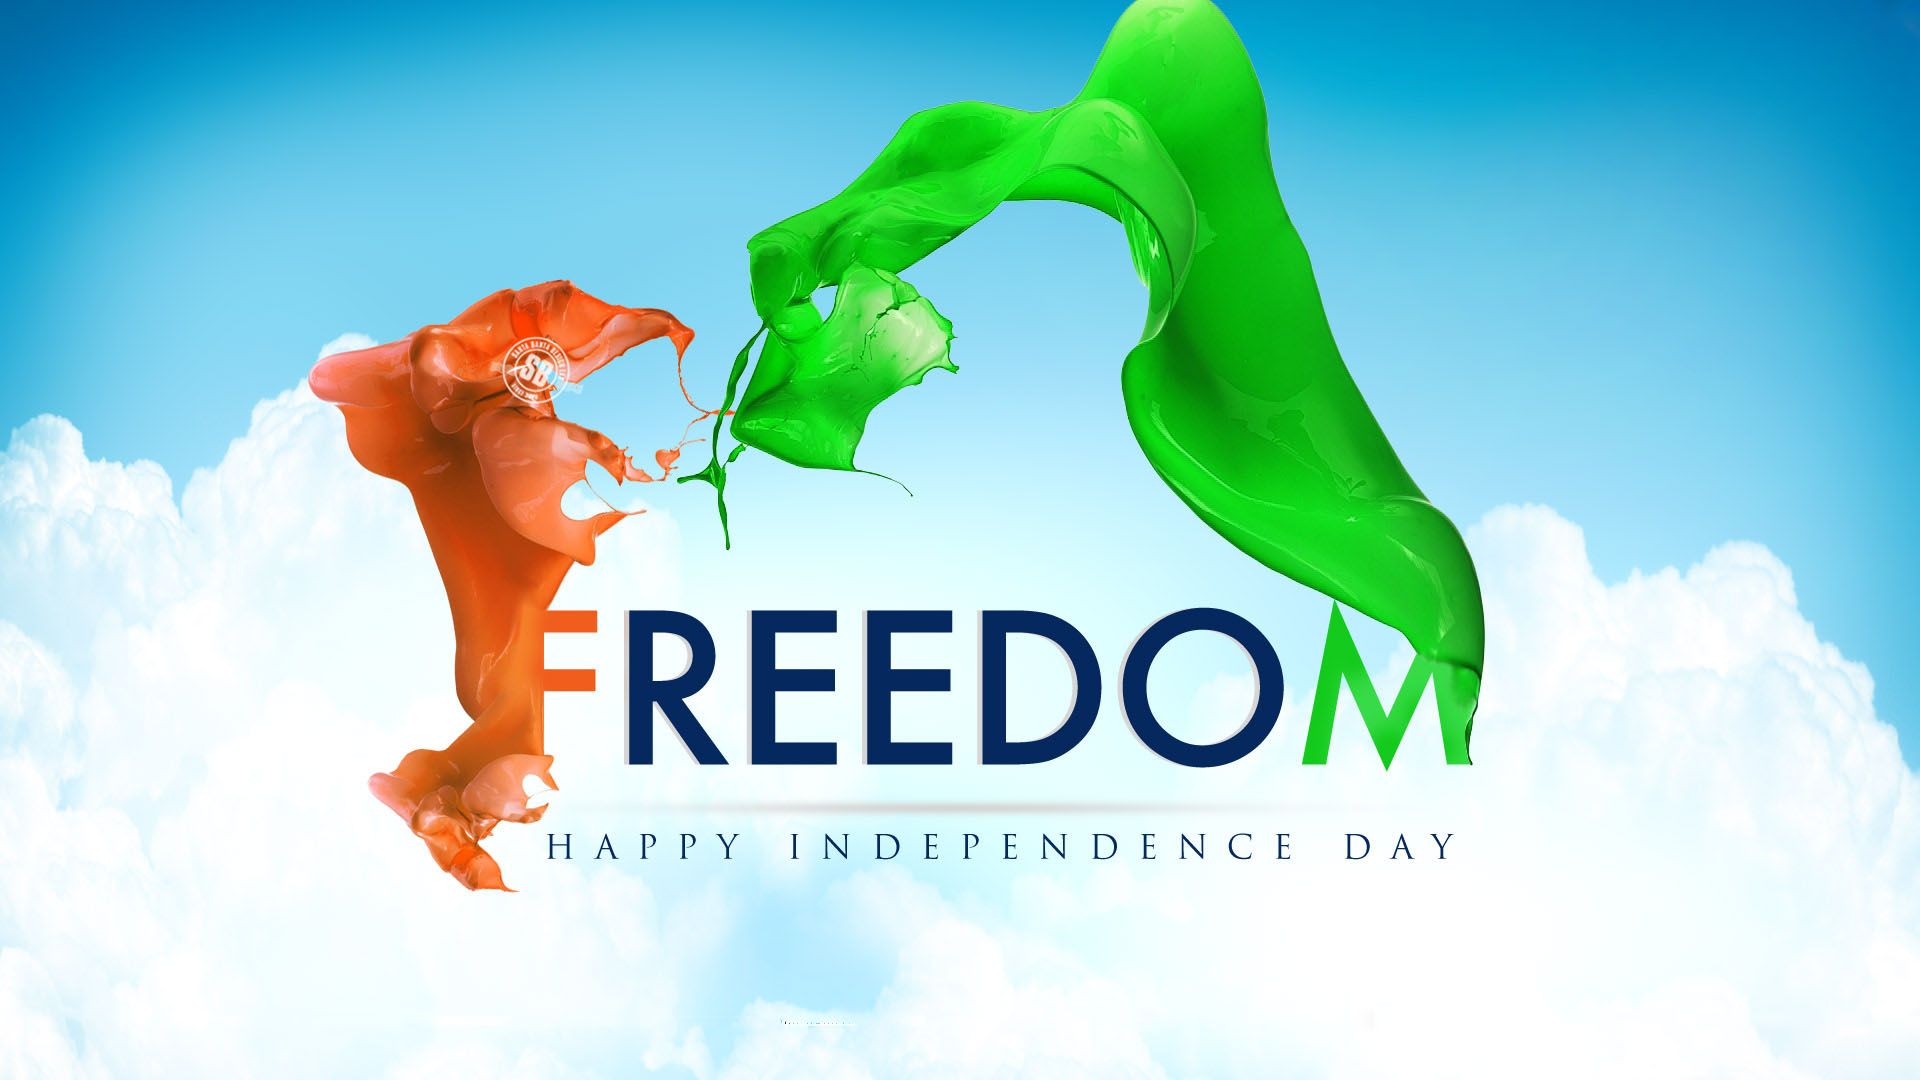 Independence Day Financial Freedom - HD Wallpaper 